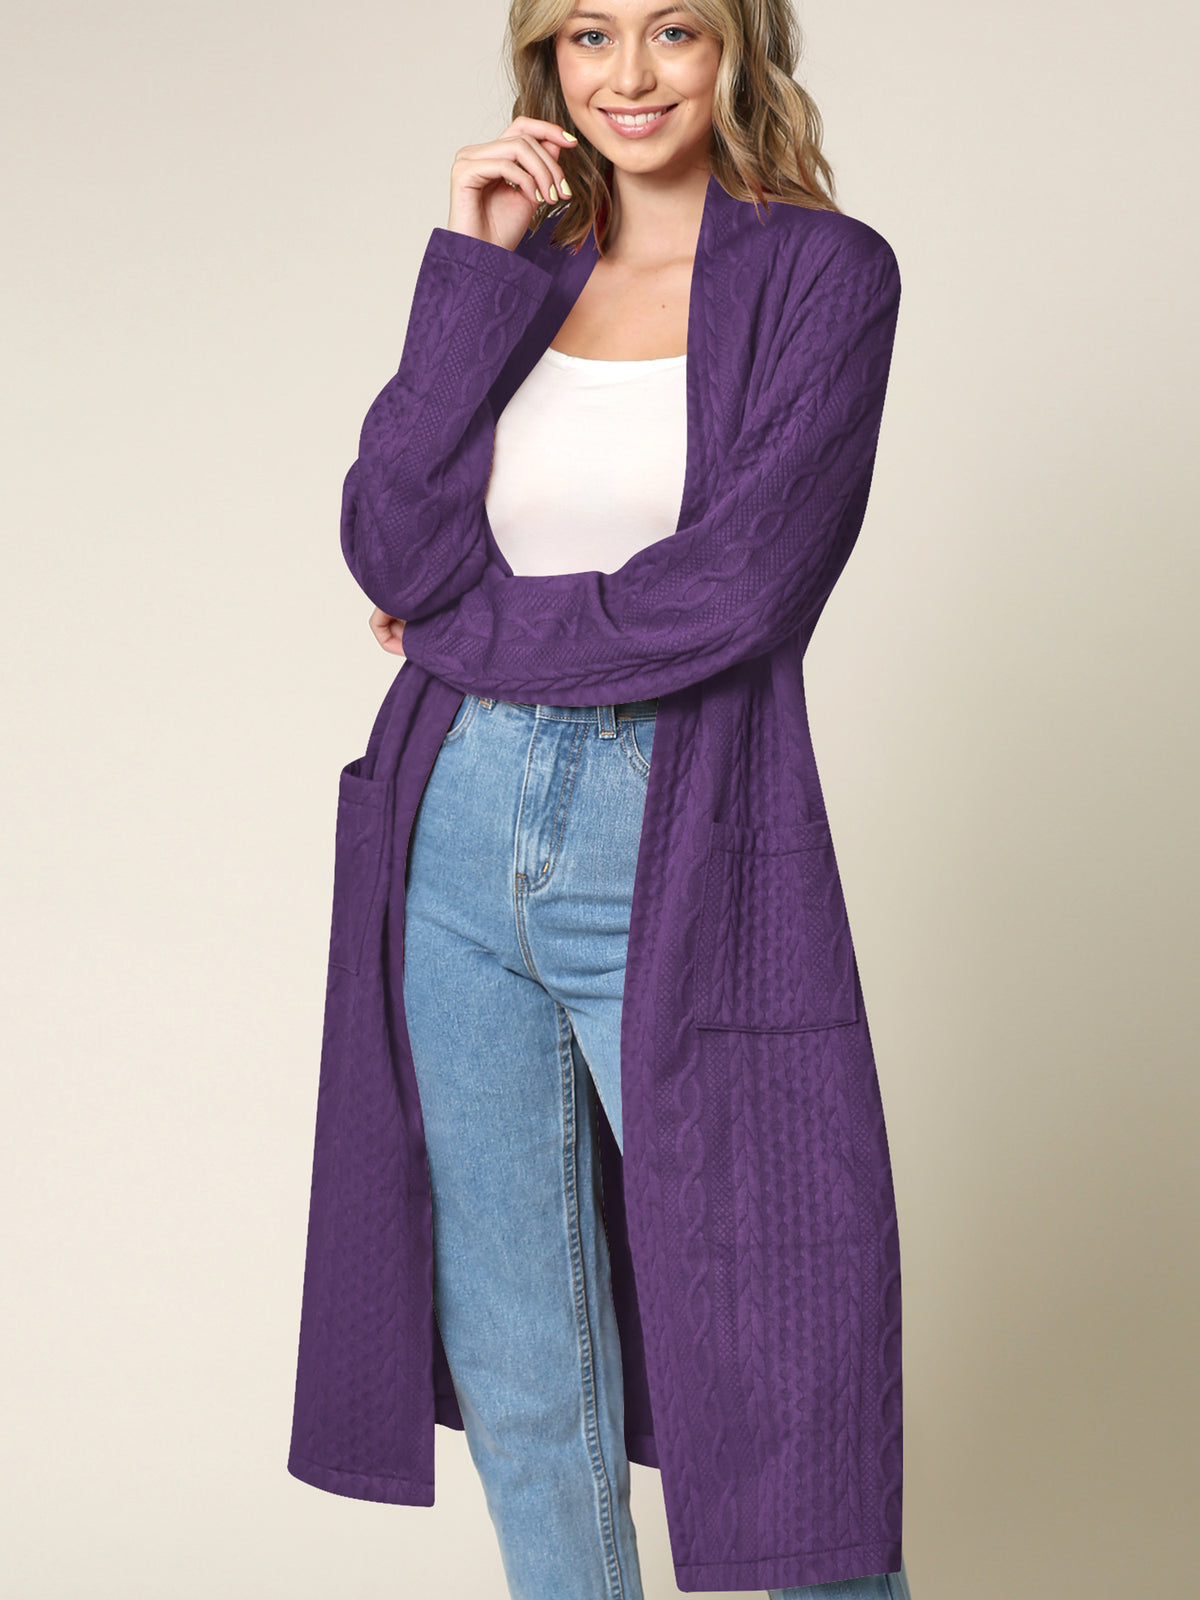 Casual Cozy Braided Open Front Long Pocket Cardigan Sweater